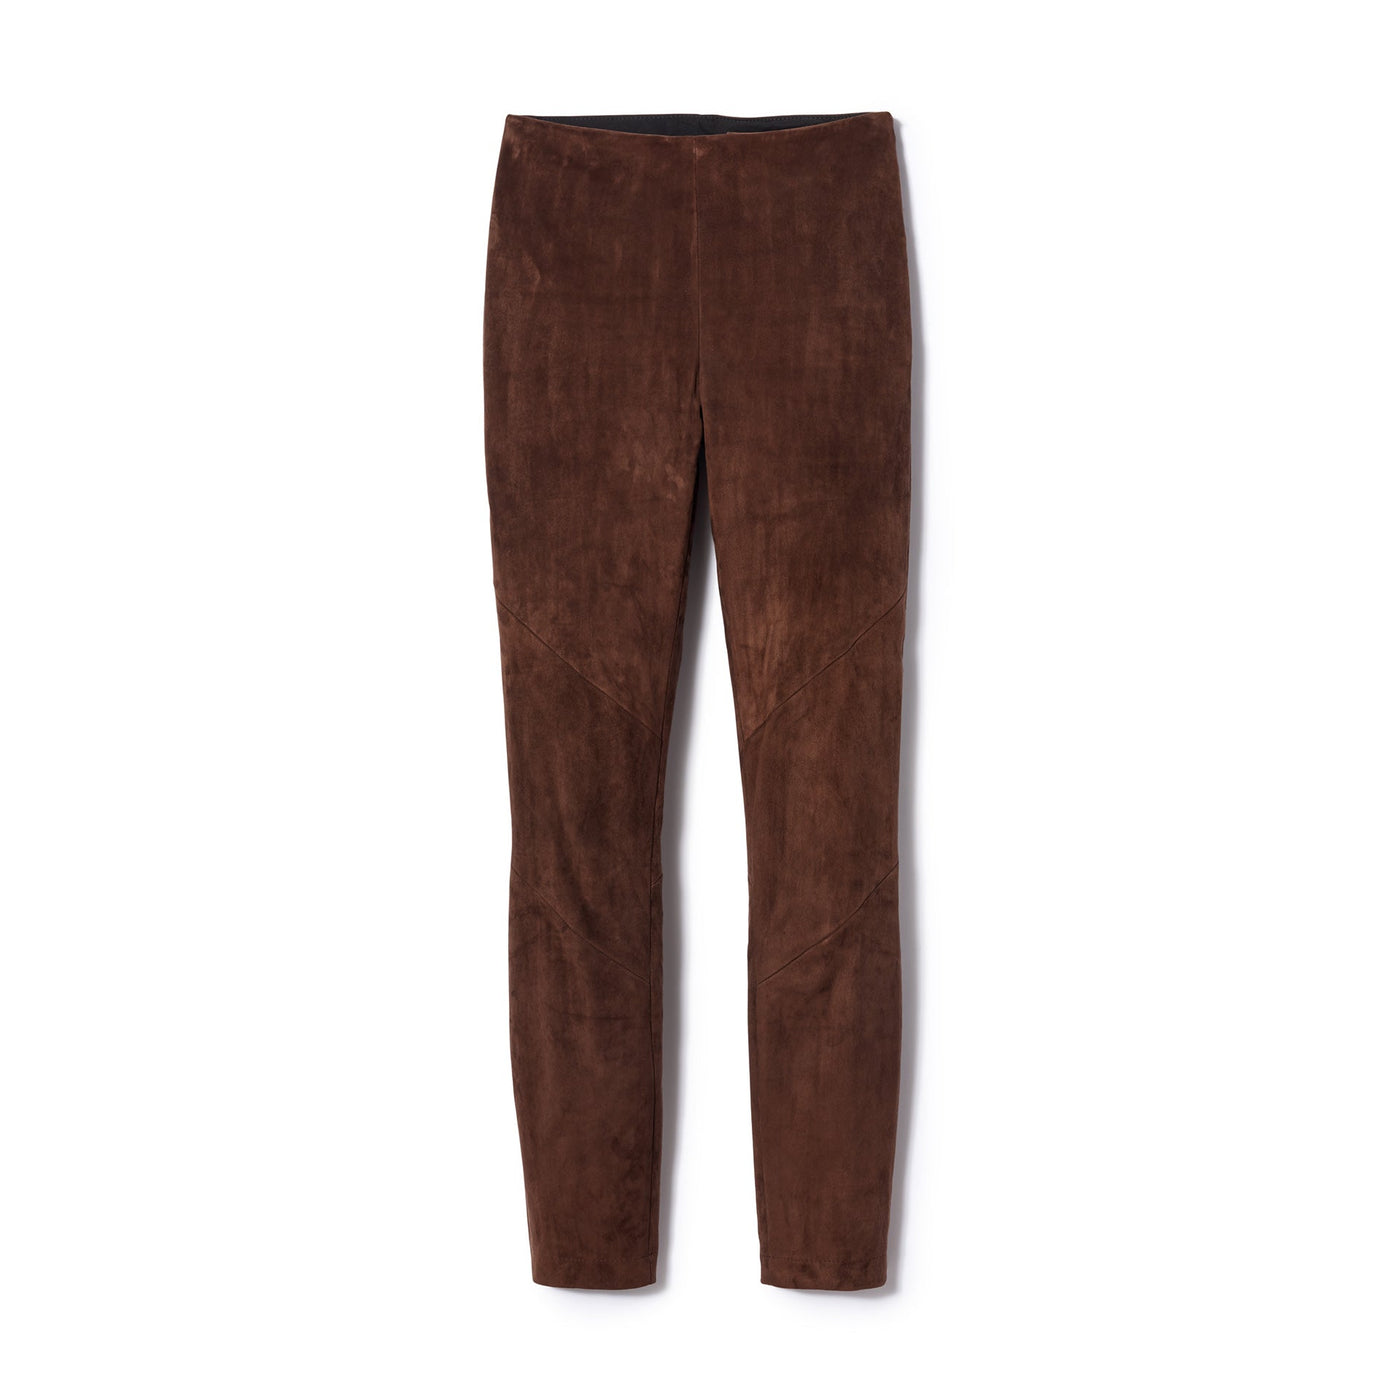 Meindl womens trousers